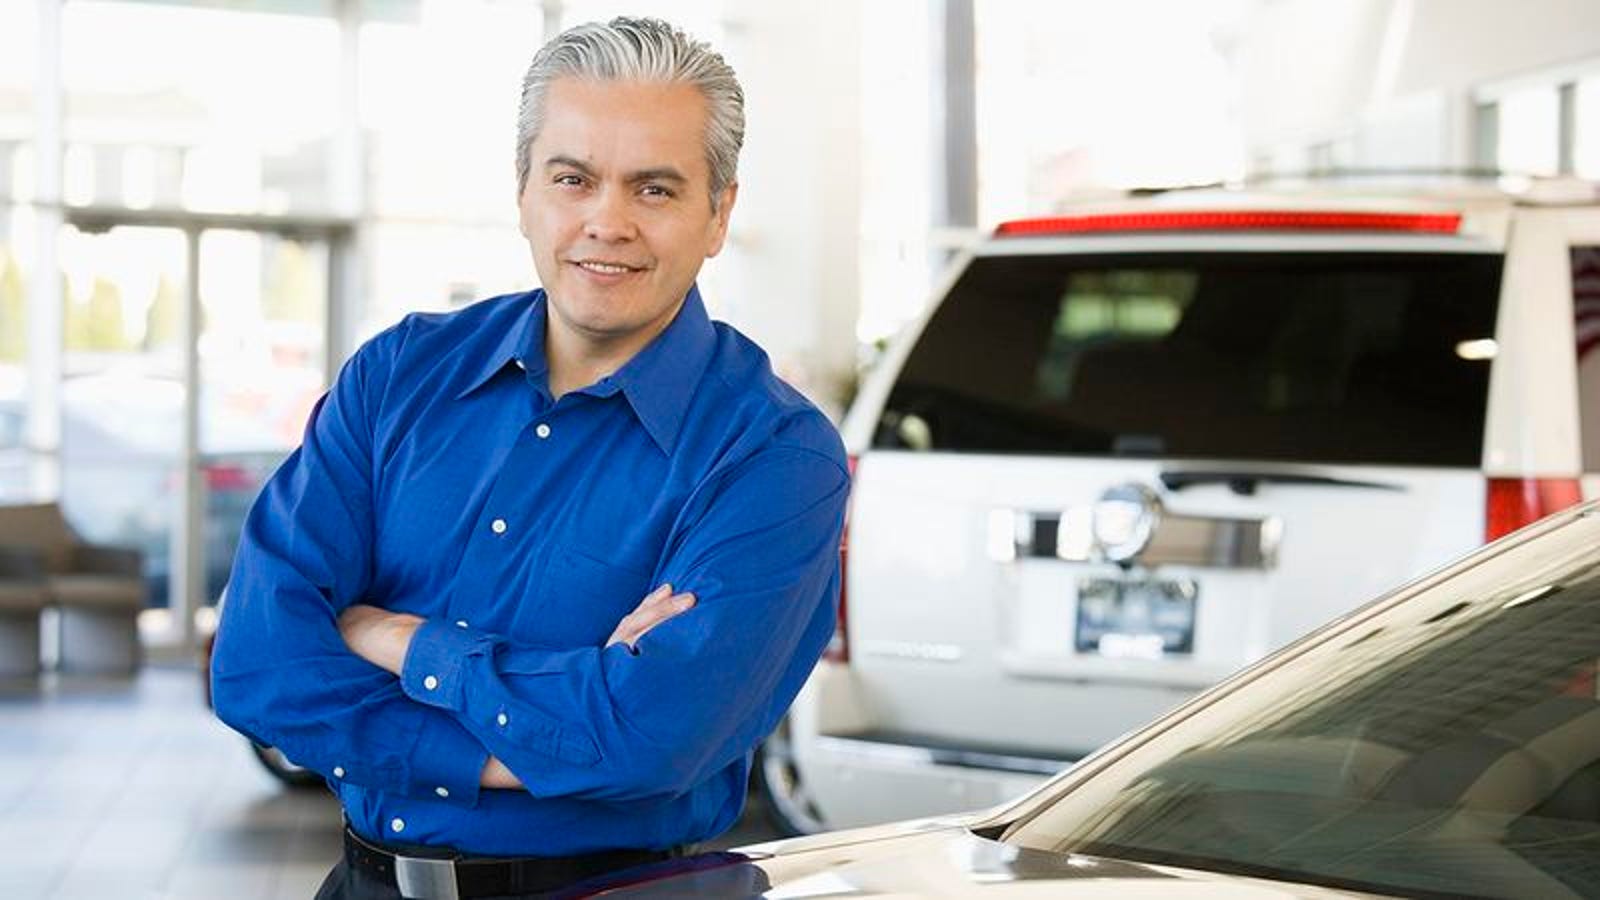 Beautiful: This Car Salesman Shaved $1,000 Off The Sticker Price Even